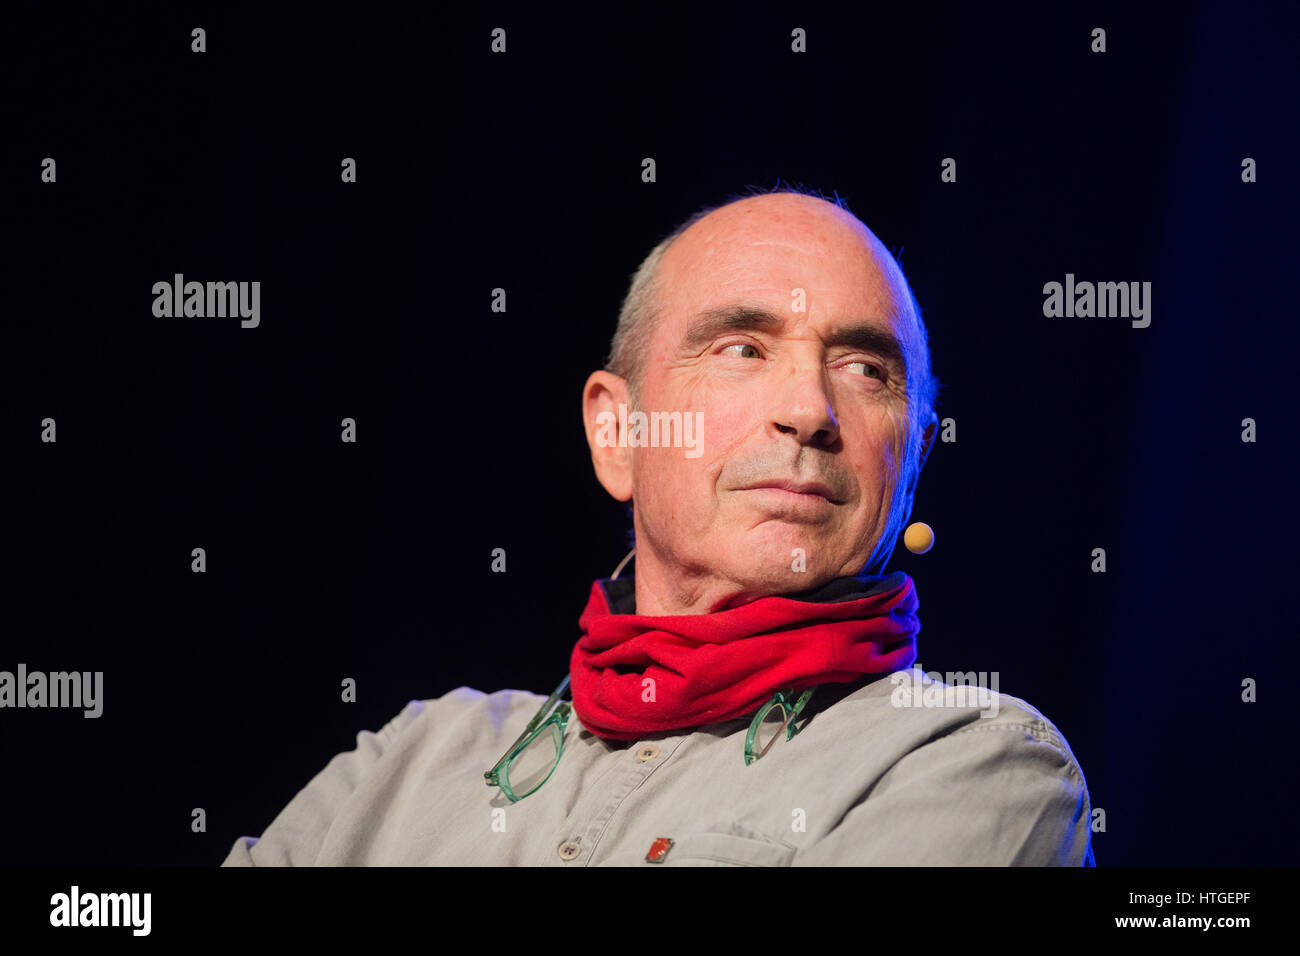 The Catalan writer, musician and politician Lluis Llach at the Lit.Cologne literature festival in Cologne, Germany, 11 March 2017. Photo: Rolf Vennenbernd/dpa Stock Photo